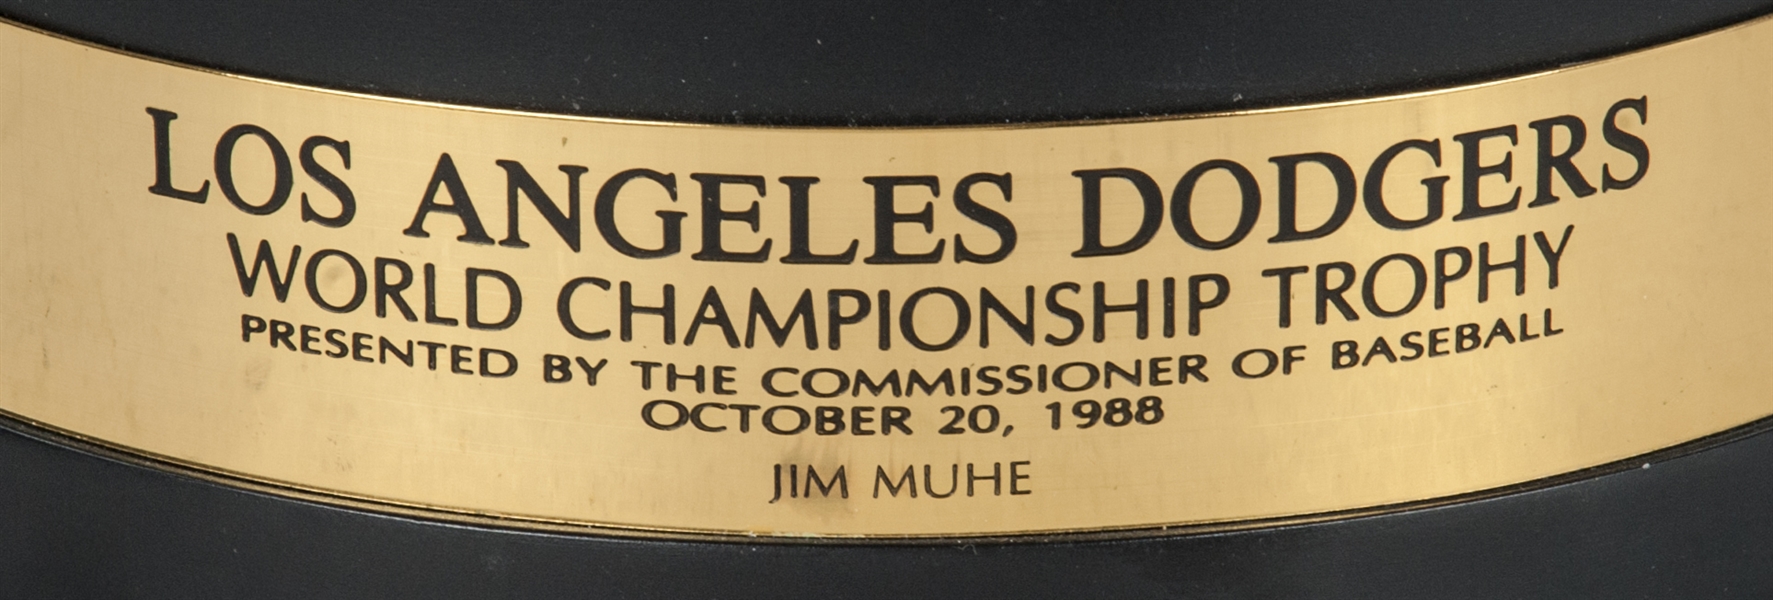 1988 Dodgers World Series Trophy Presented to Jeff Hamilton